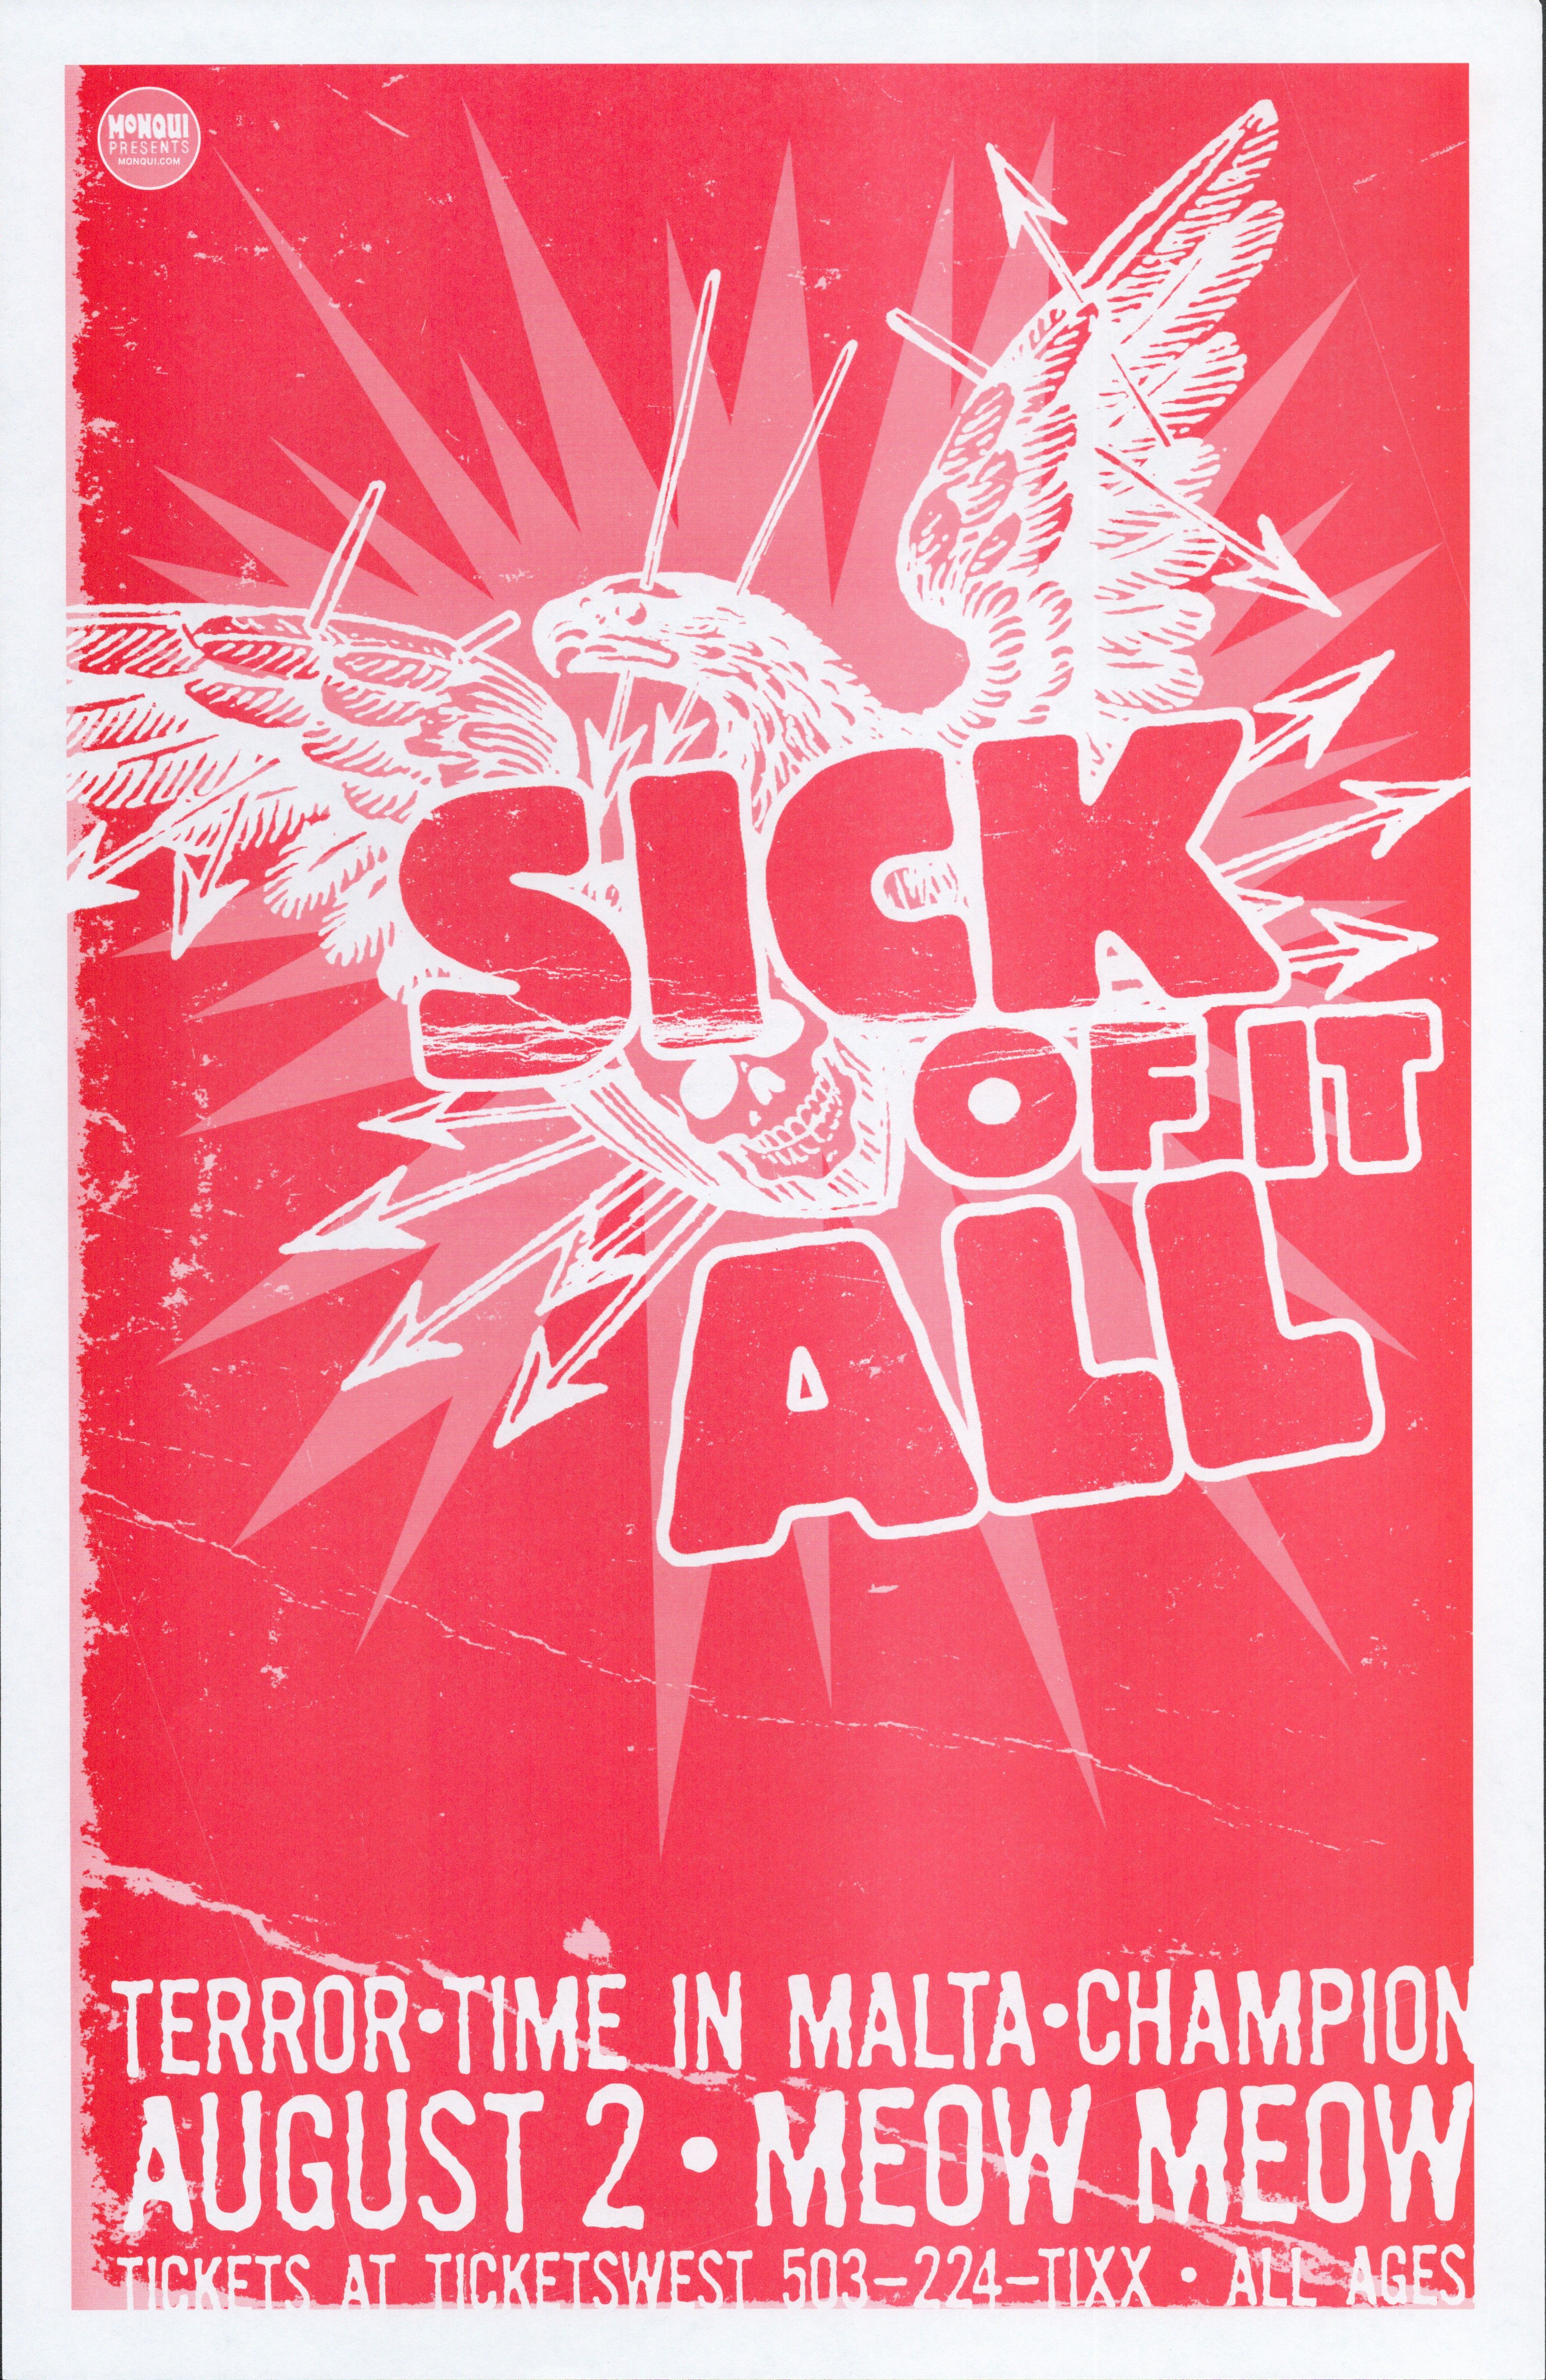 MXP-141.25 Sick Of It All Meow Meow 2004 Concert Poster